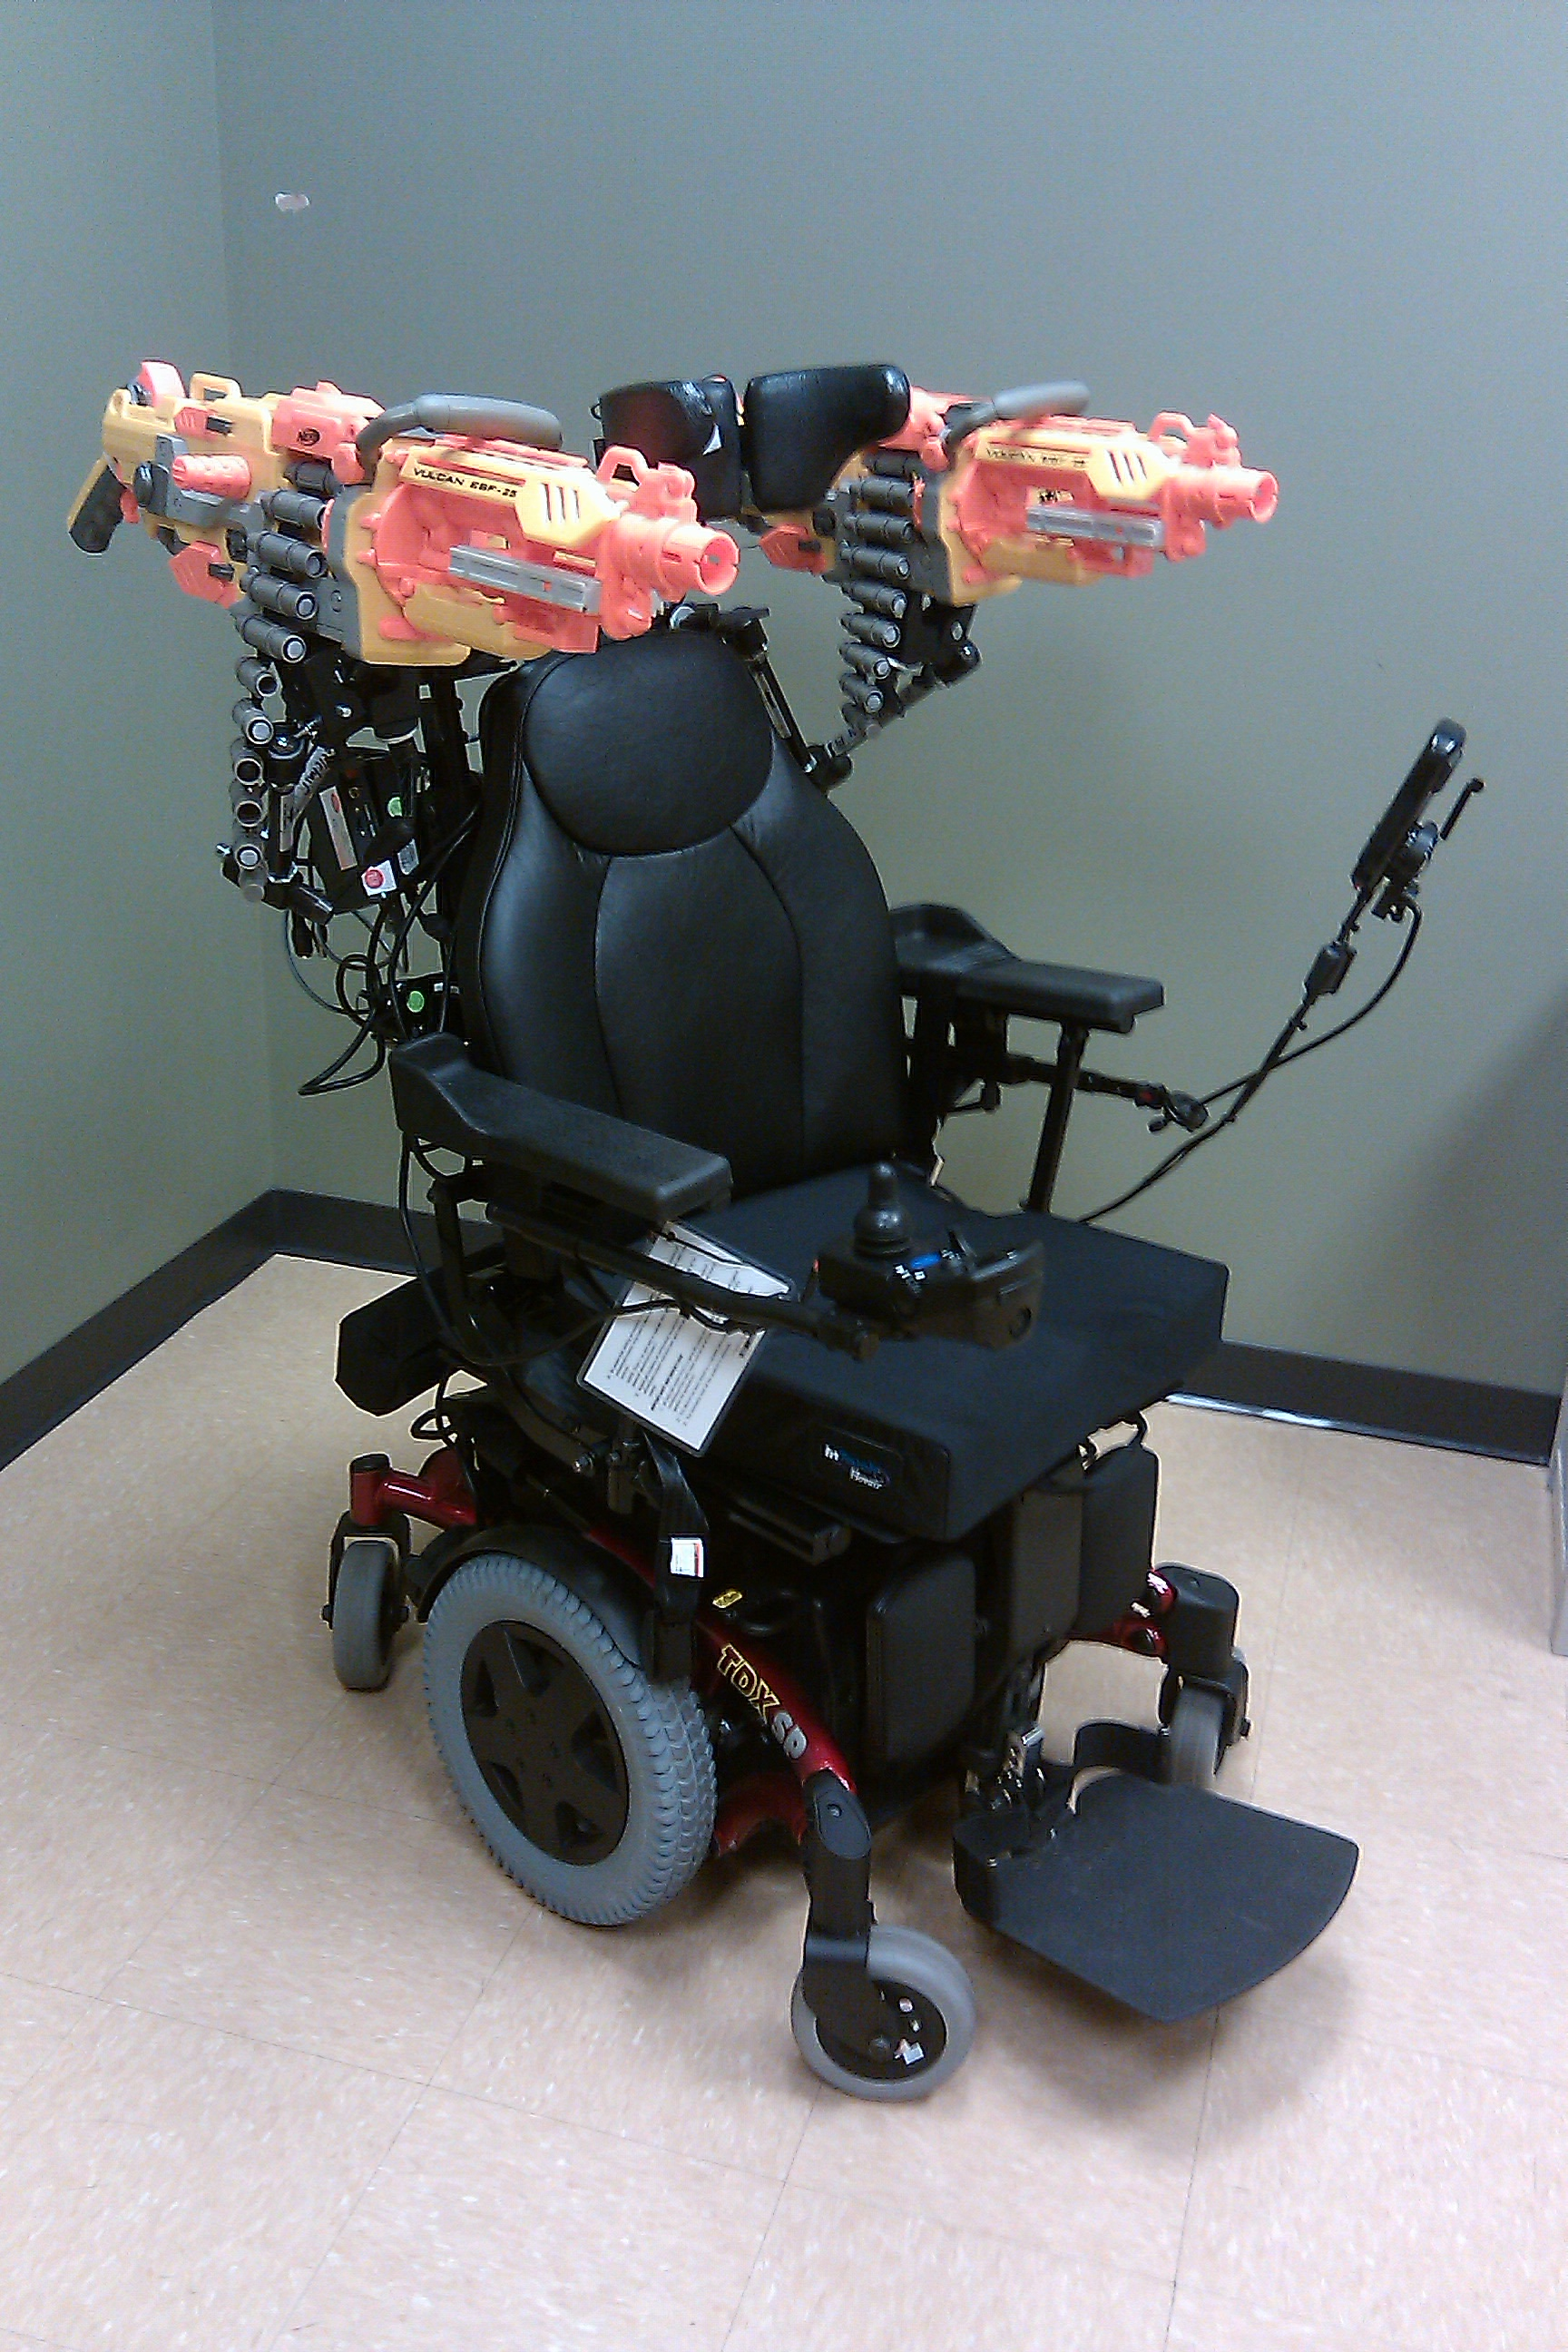 Wheelchair with Nerf machineguns mounted